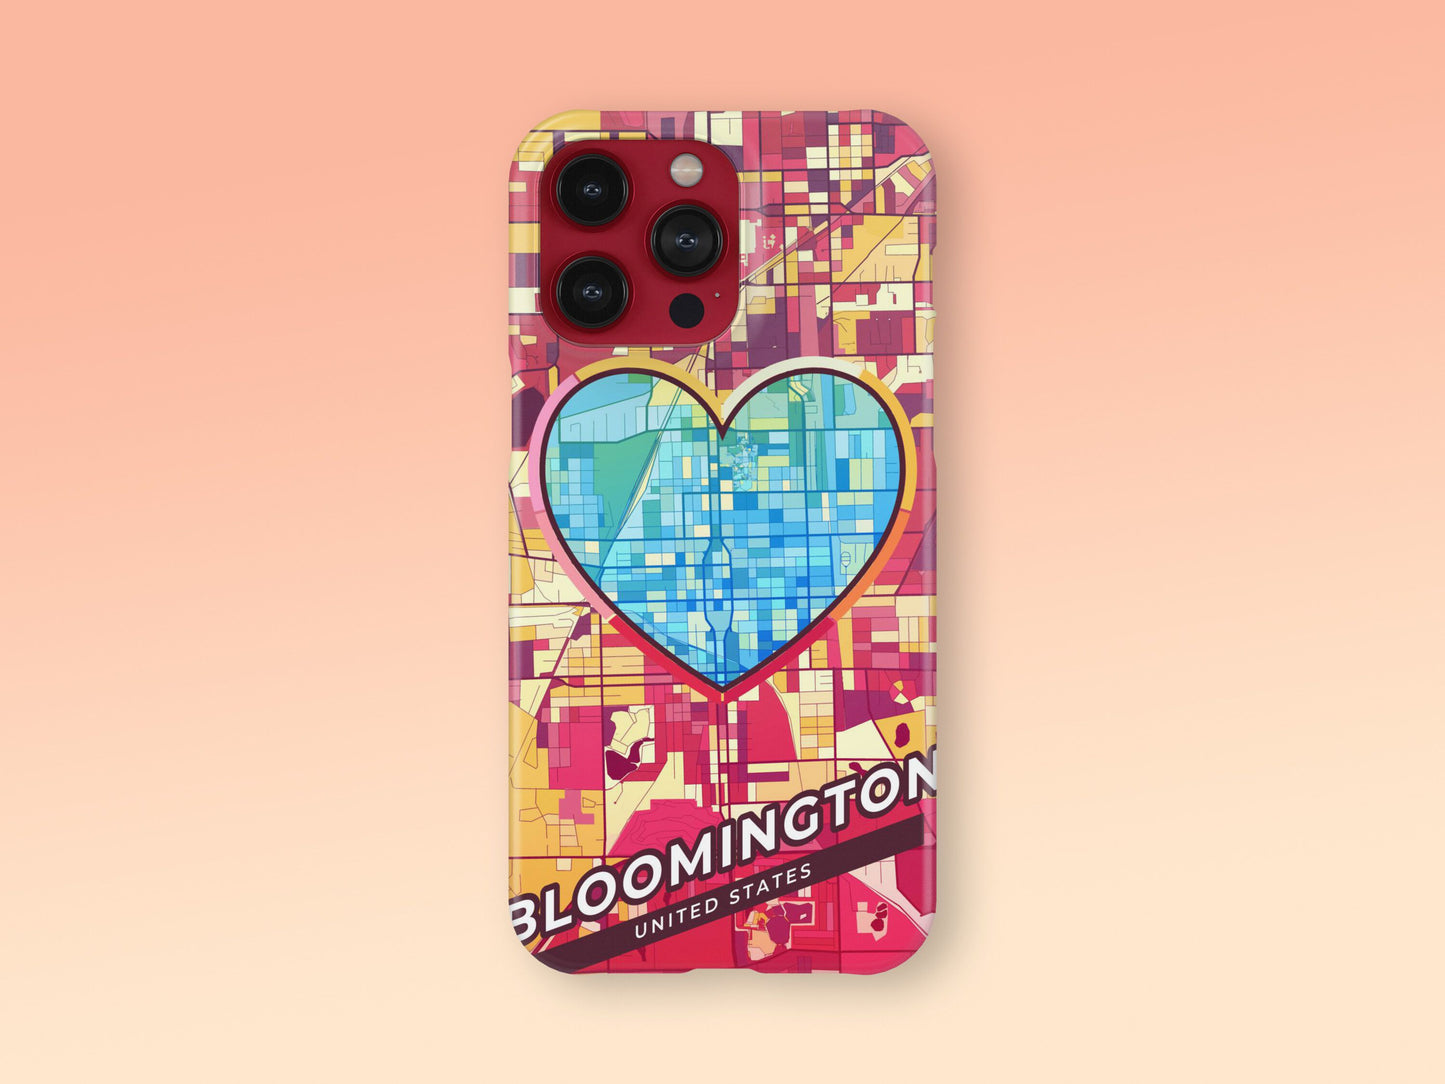 Bloomington Illinois slim phone case with colorful icon. Birthday, wedding or housewarming gift. Couple match cases. 2